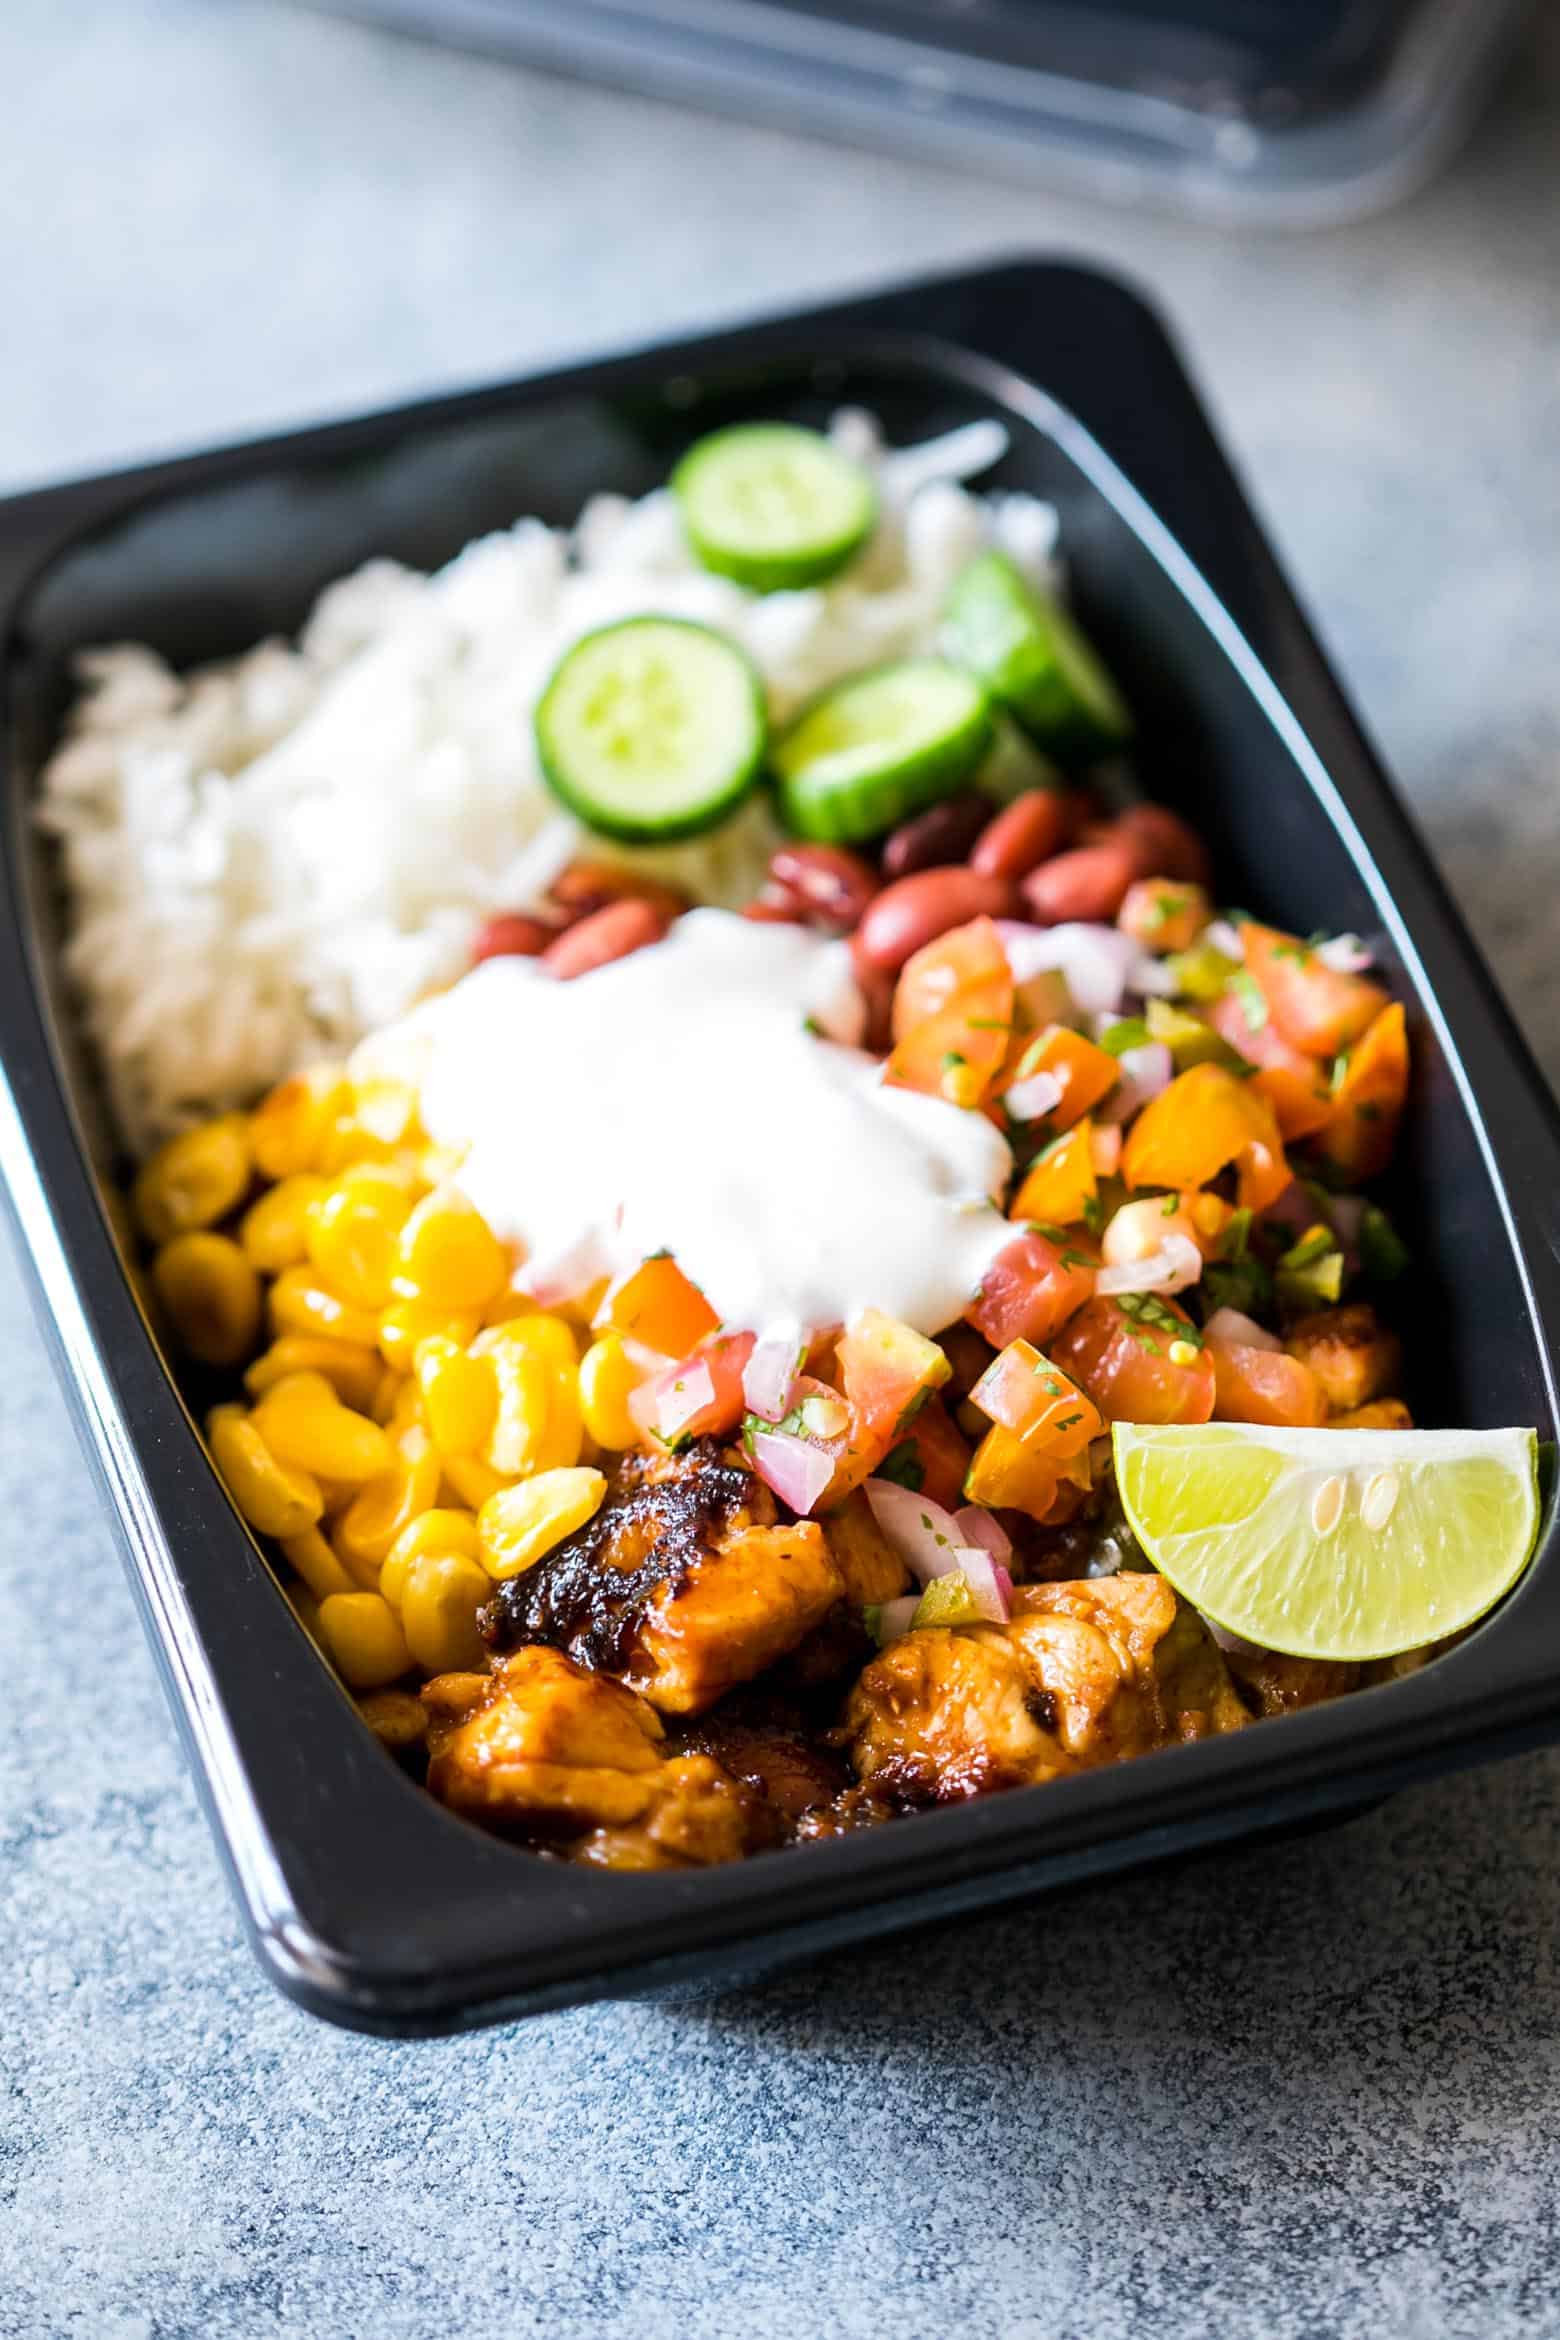 Easy chicken burrito meal prep bowls are perfect for planning weekday work lunches ahead! They are super tasty, gluten free and a healthy way to make sure you have home cooked lunch boxes ready to go. 